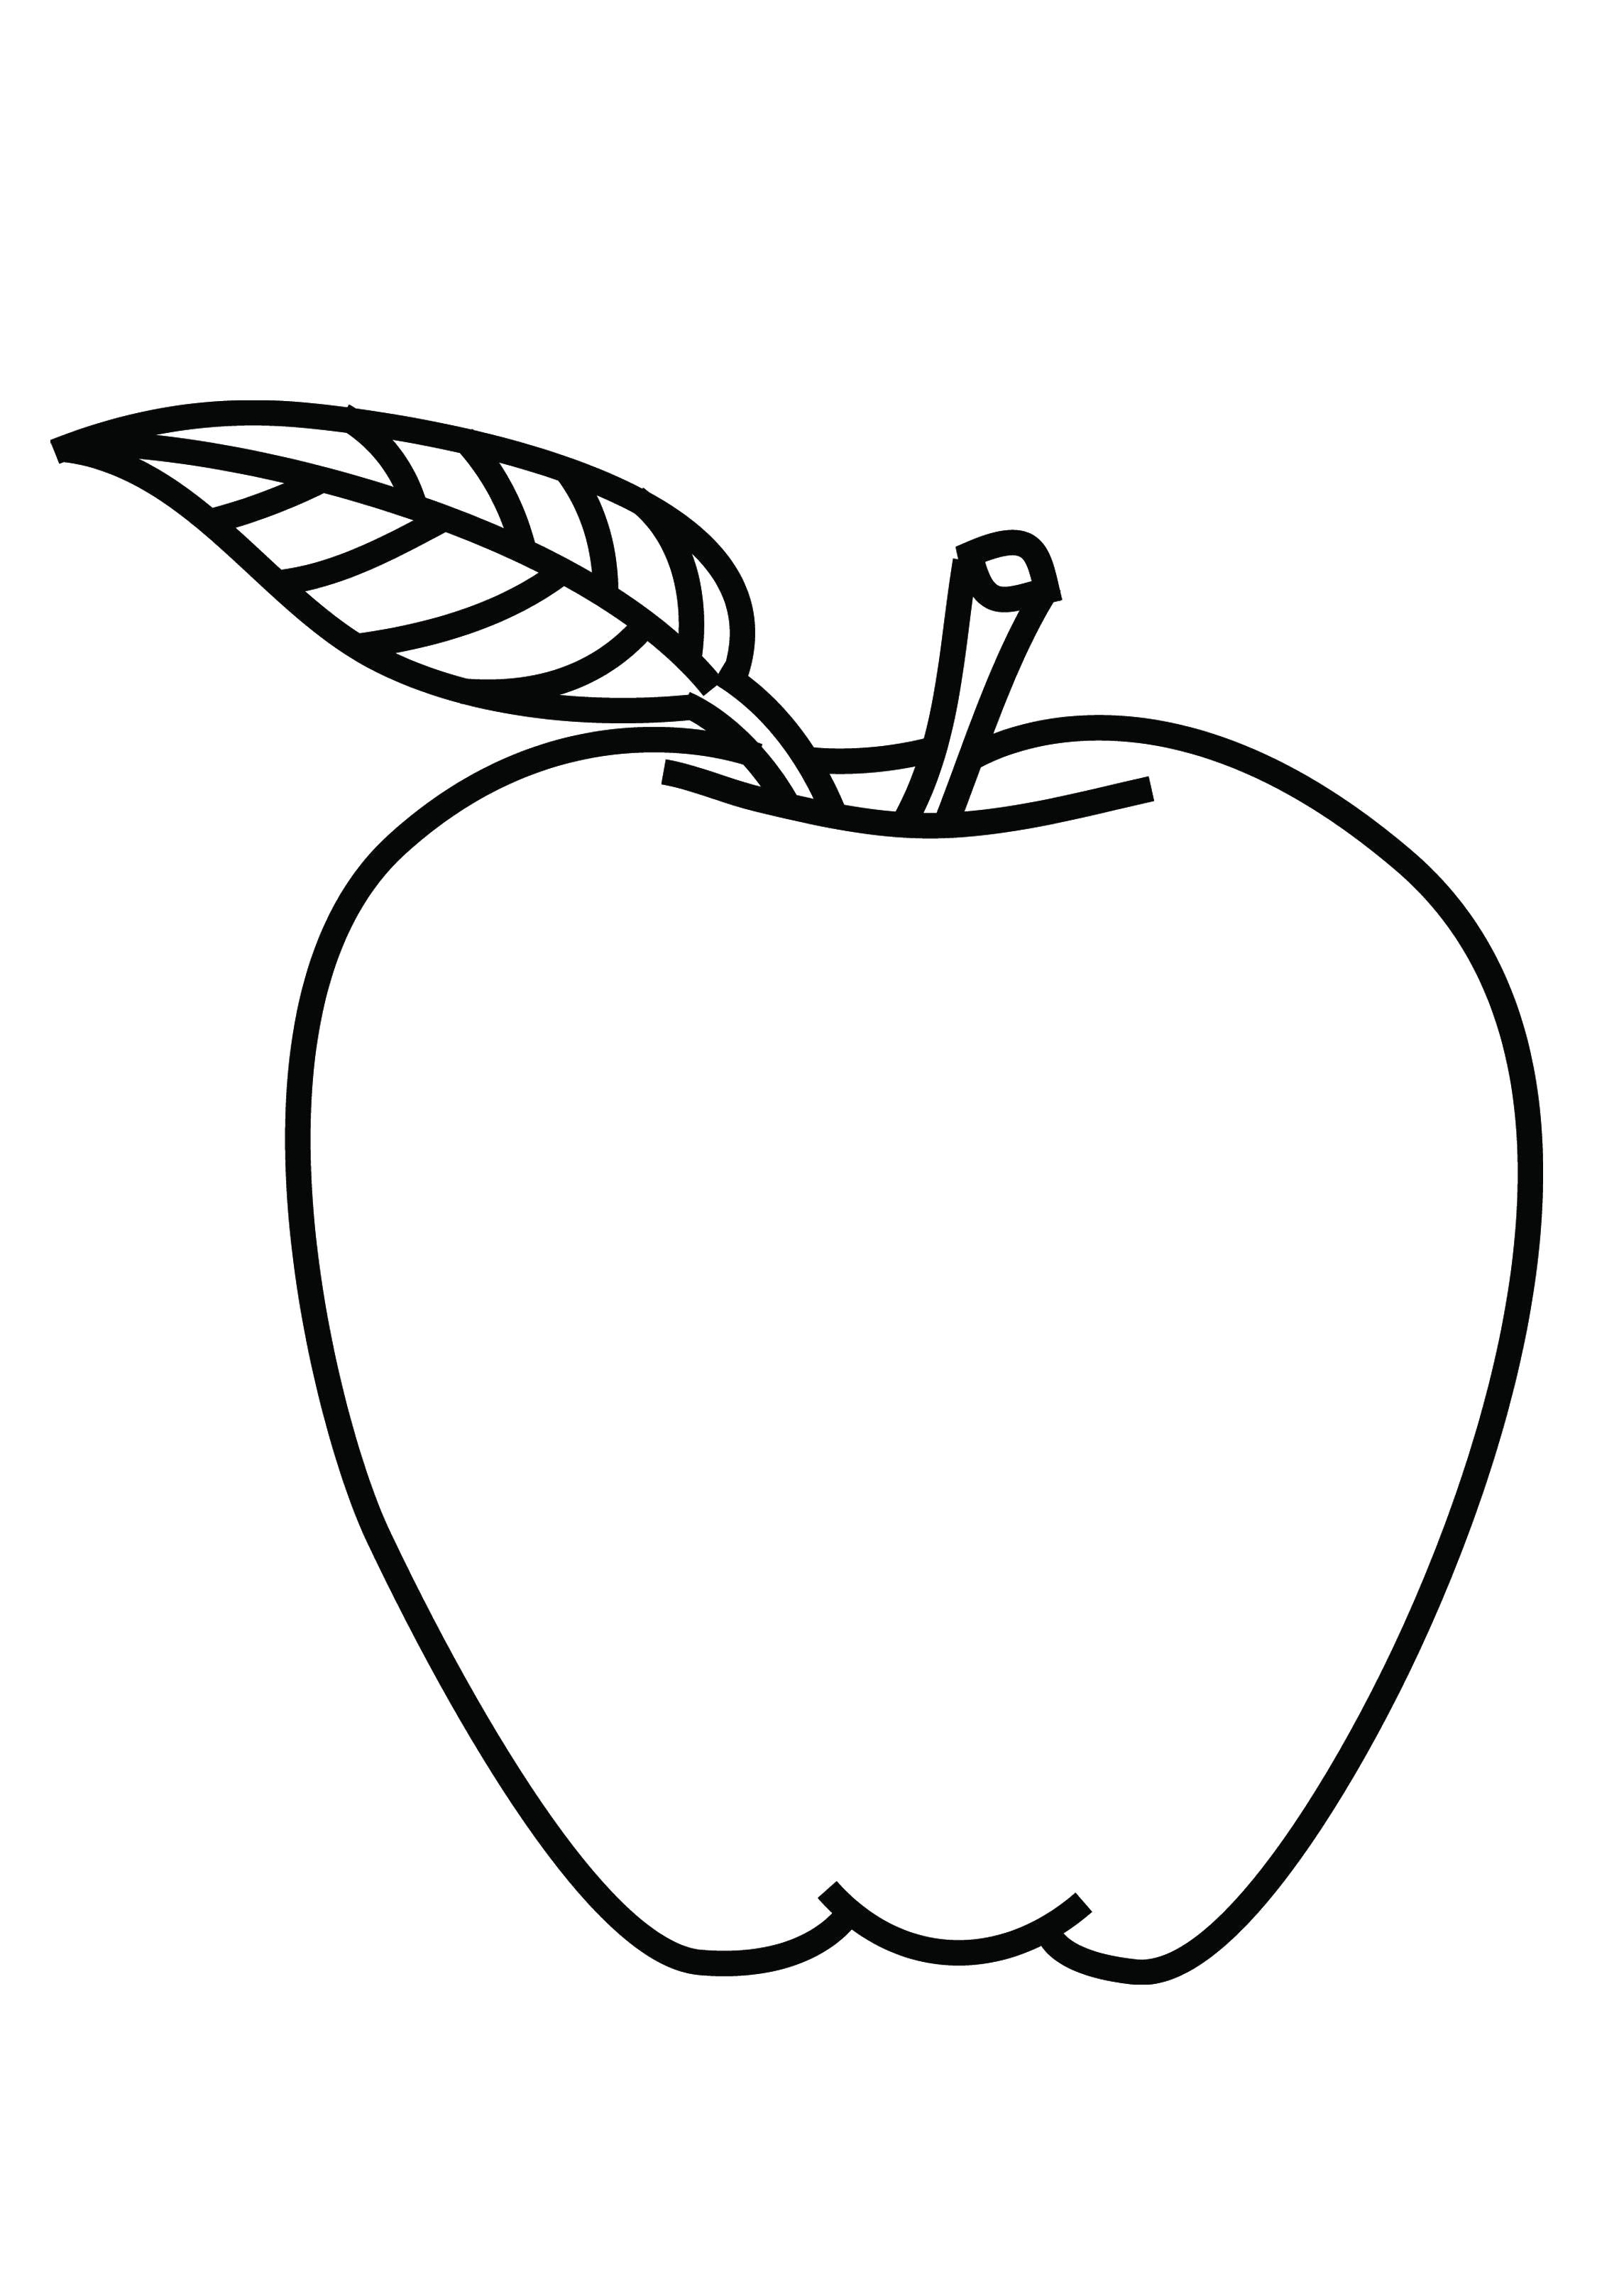 Apples Coloring Pages Apples Fruit From The Tree Coloring Pages Jpg